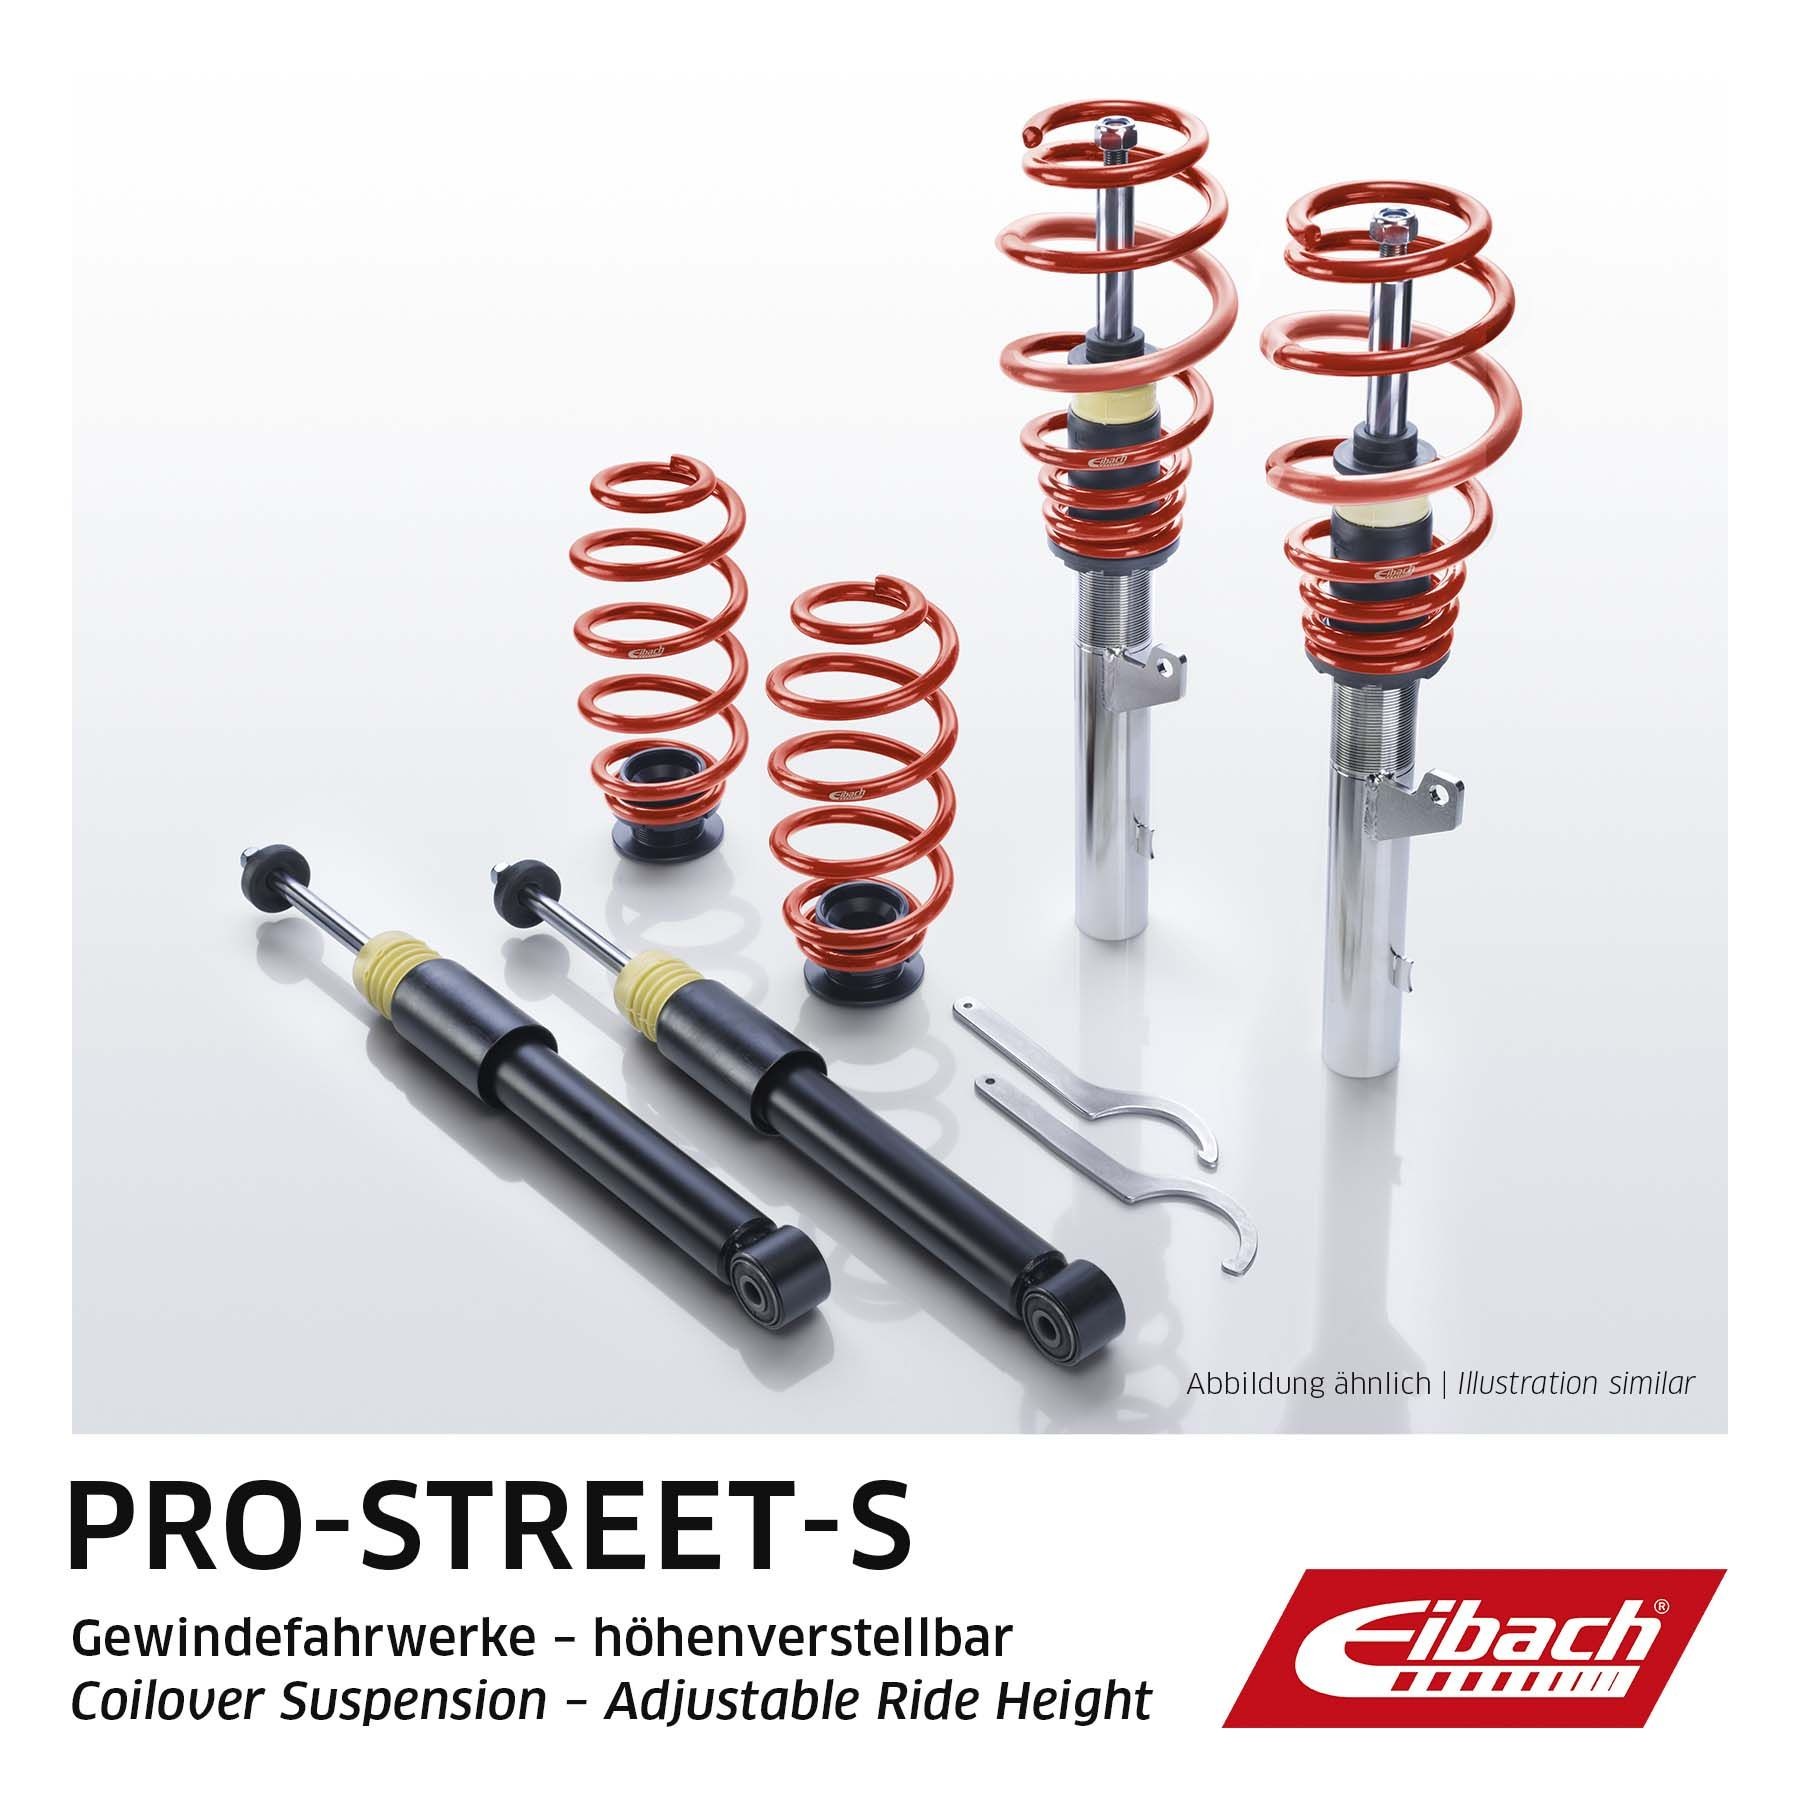 EIBACH PSS65-70-002-01-22 Suspension kit, coil springs / shock absorbers PEUGEOT 407 2005 in original quality